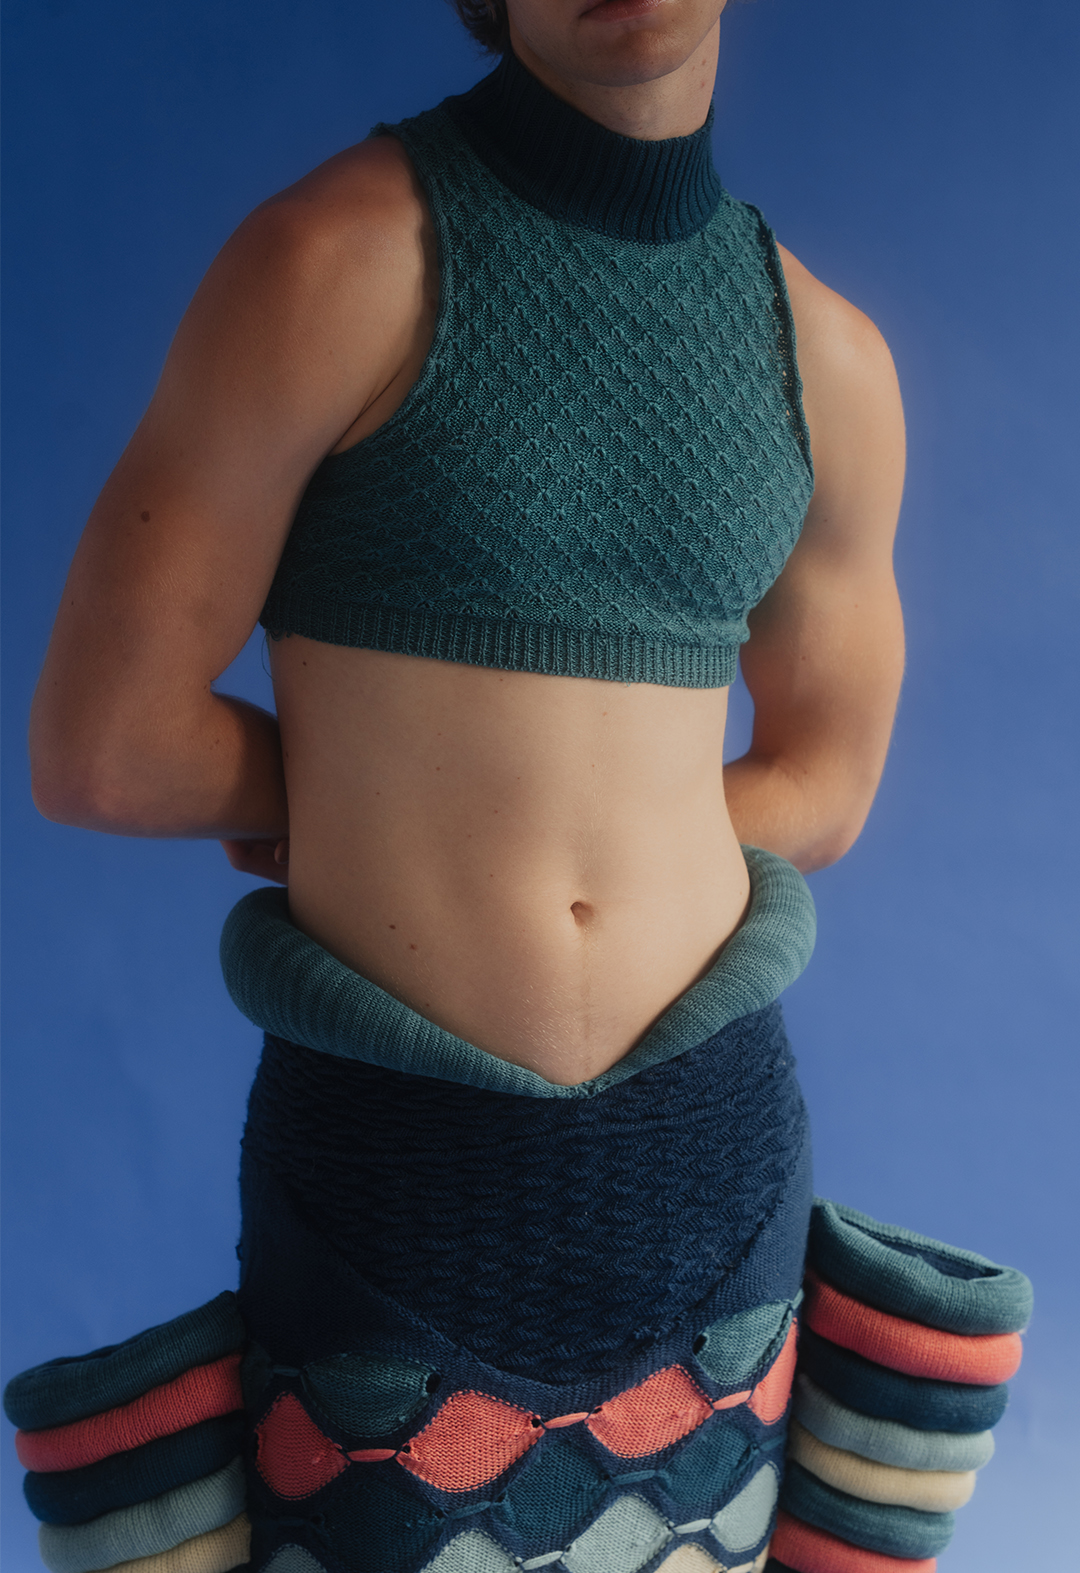 This is a close-up shot of the model wearing a teal knit tank top and a blue, teal, pink, and yellow sculptural skirt.